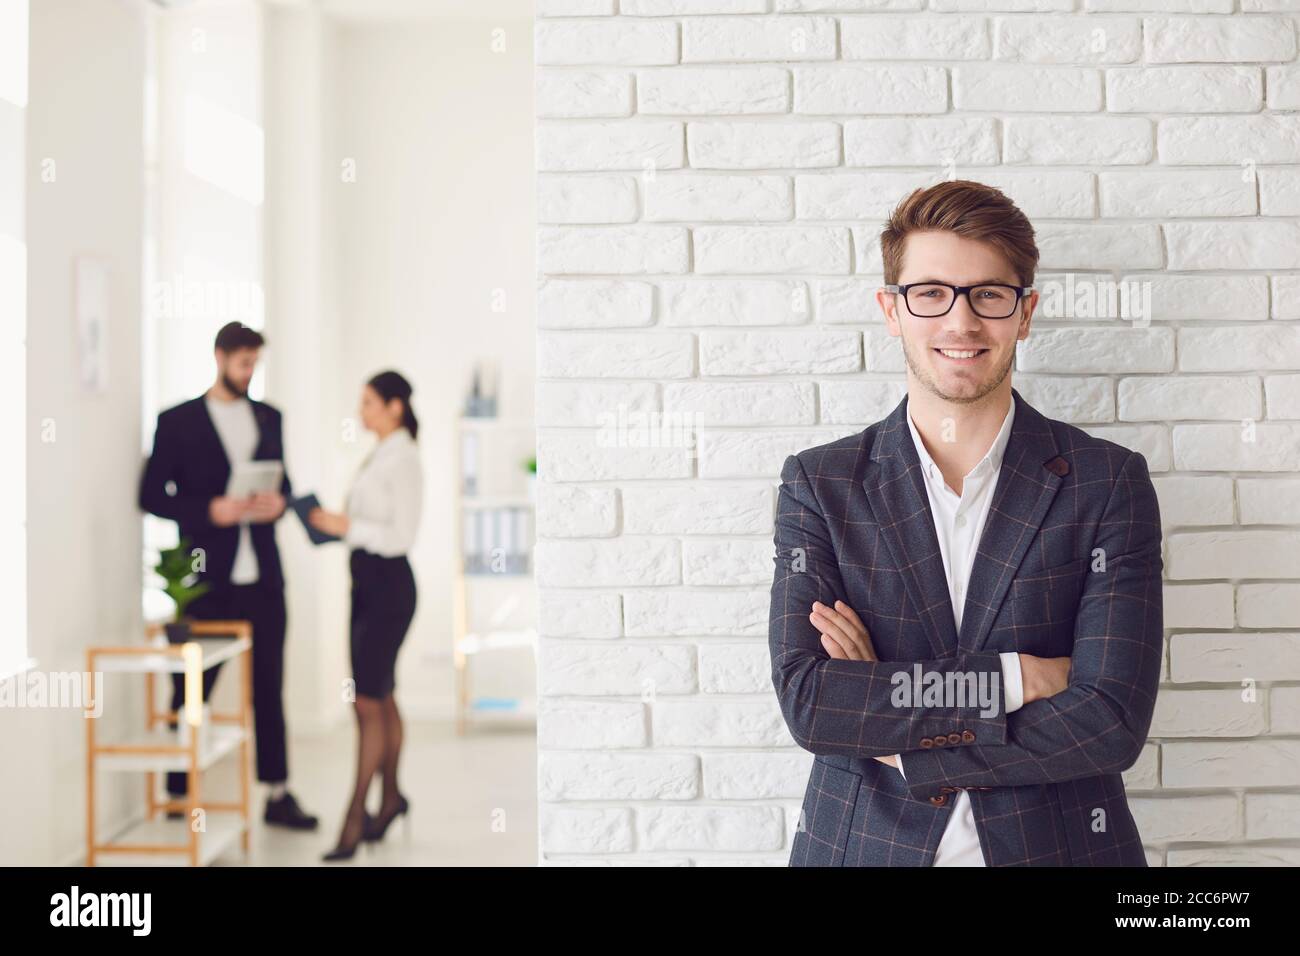 Smiling positive businessman in casual attire standing in a white office on a white wall. Stock Photo